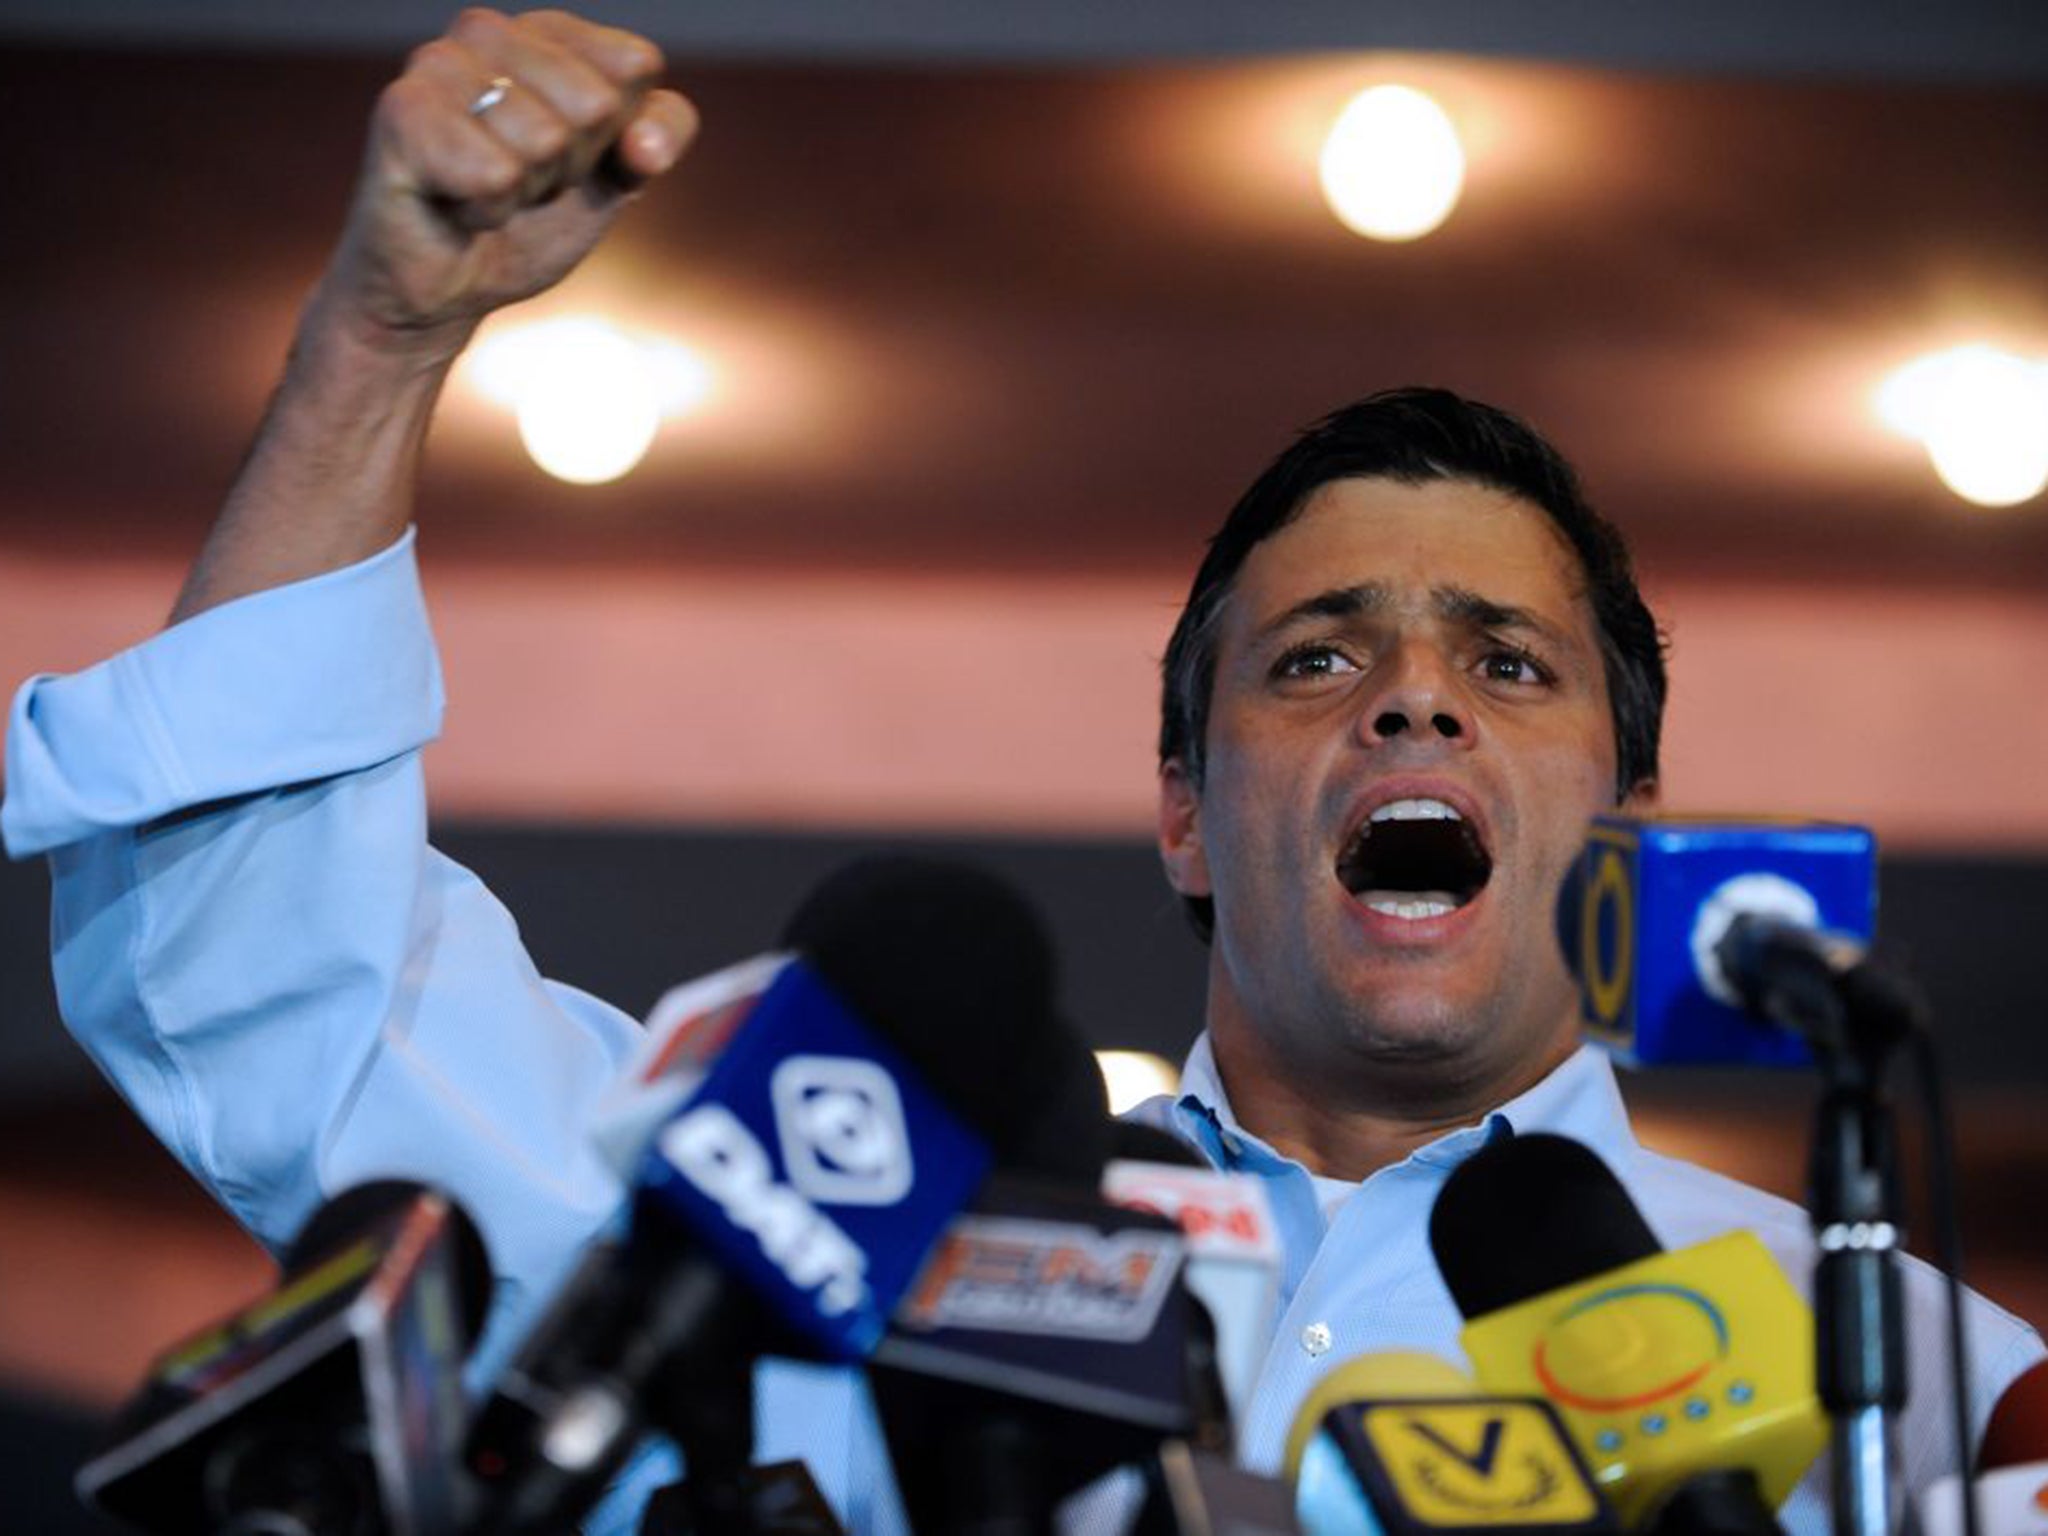 Leopoldo Lopez was jailed for 14 years in a trial denounced as politically motivated